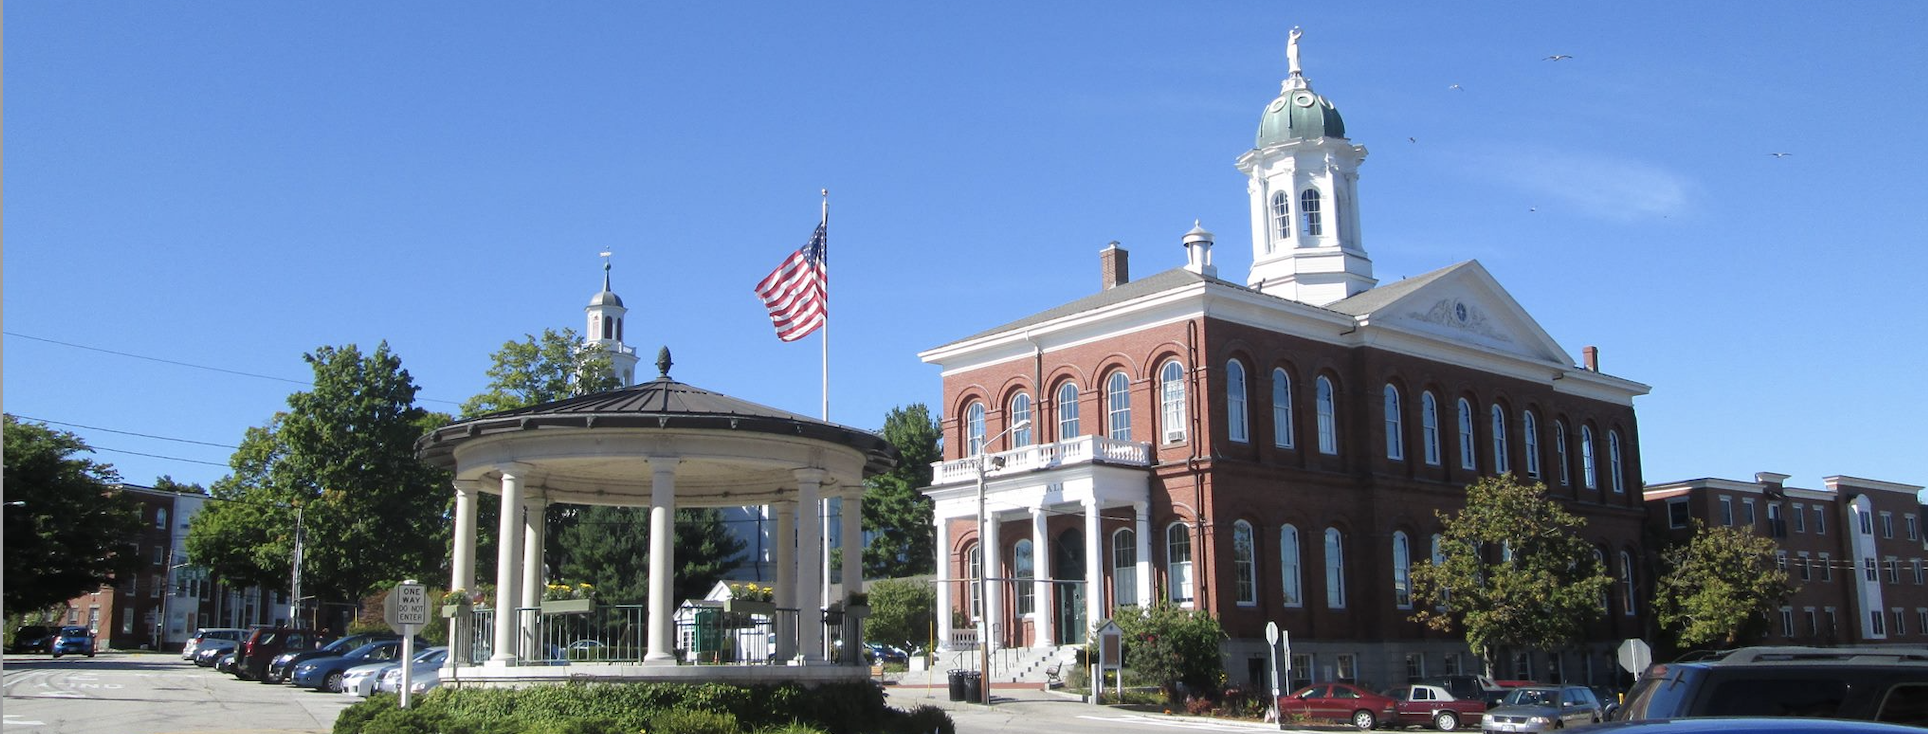 Featured image for “Exeter Town Hall”